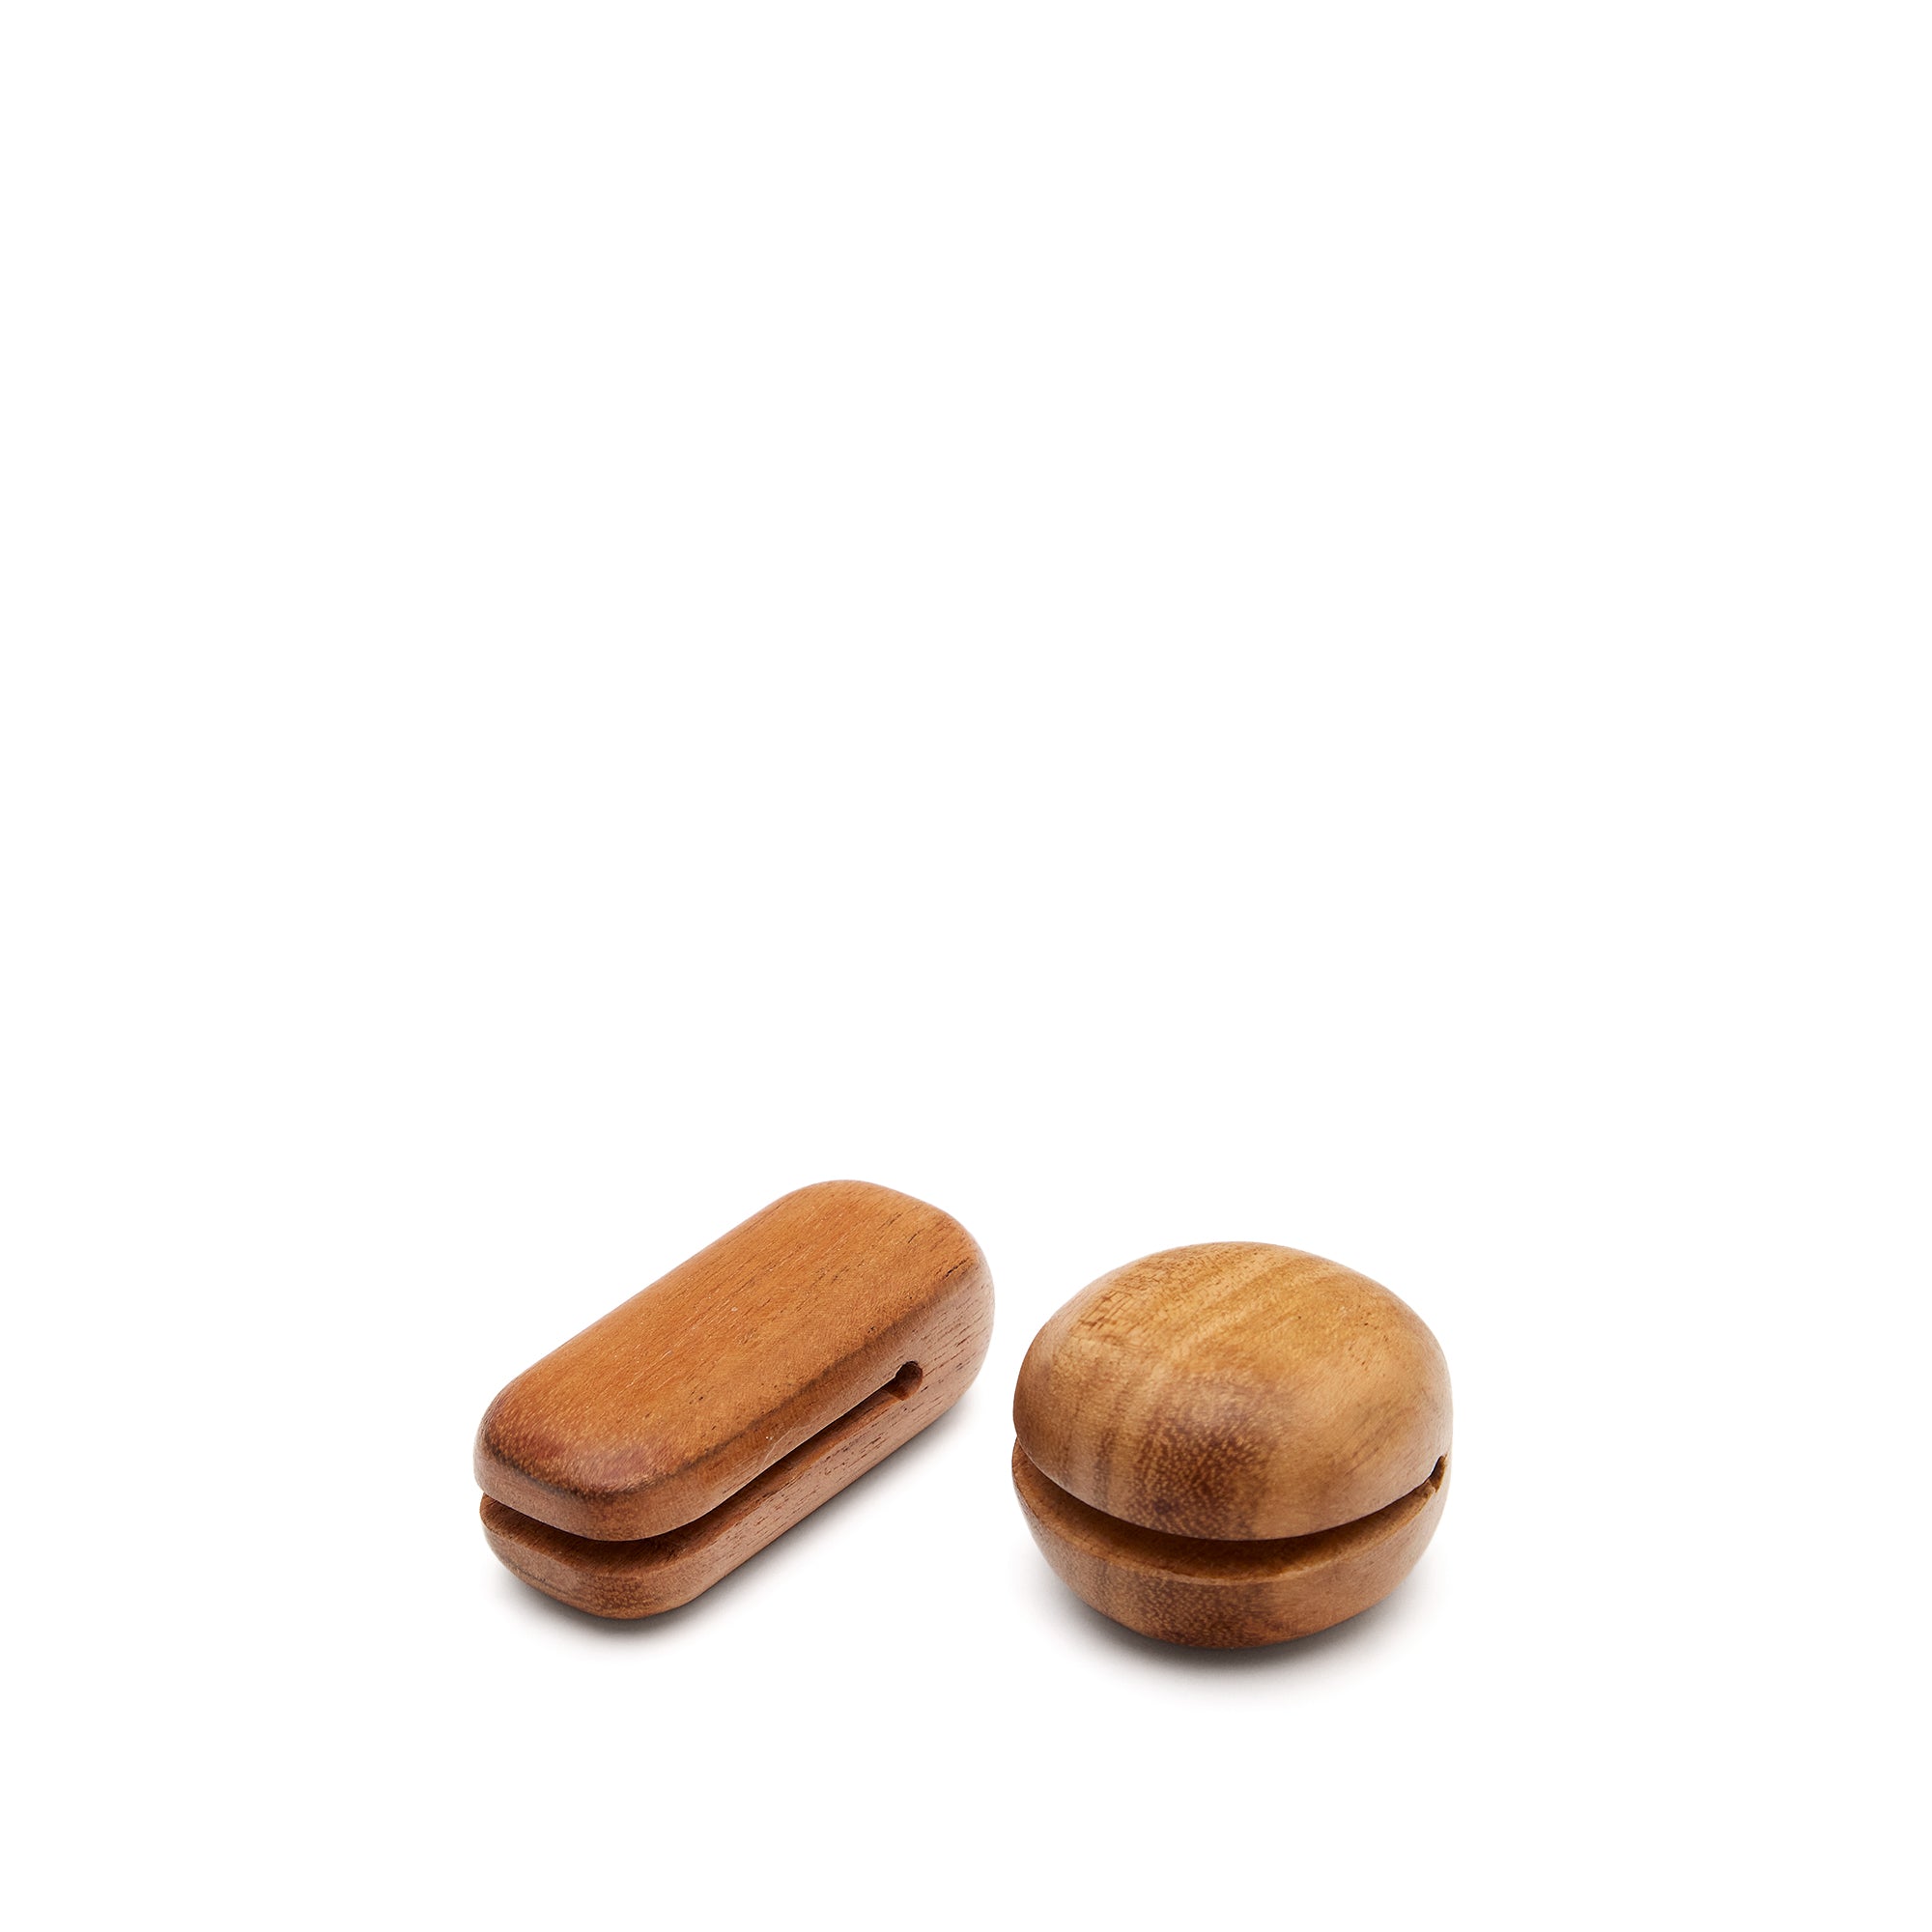 Xena set of 2 solid acacia wood clips for closing bags